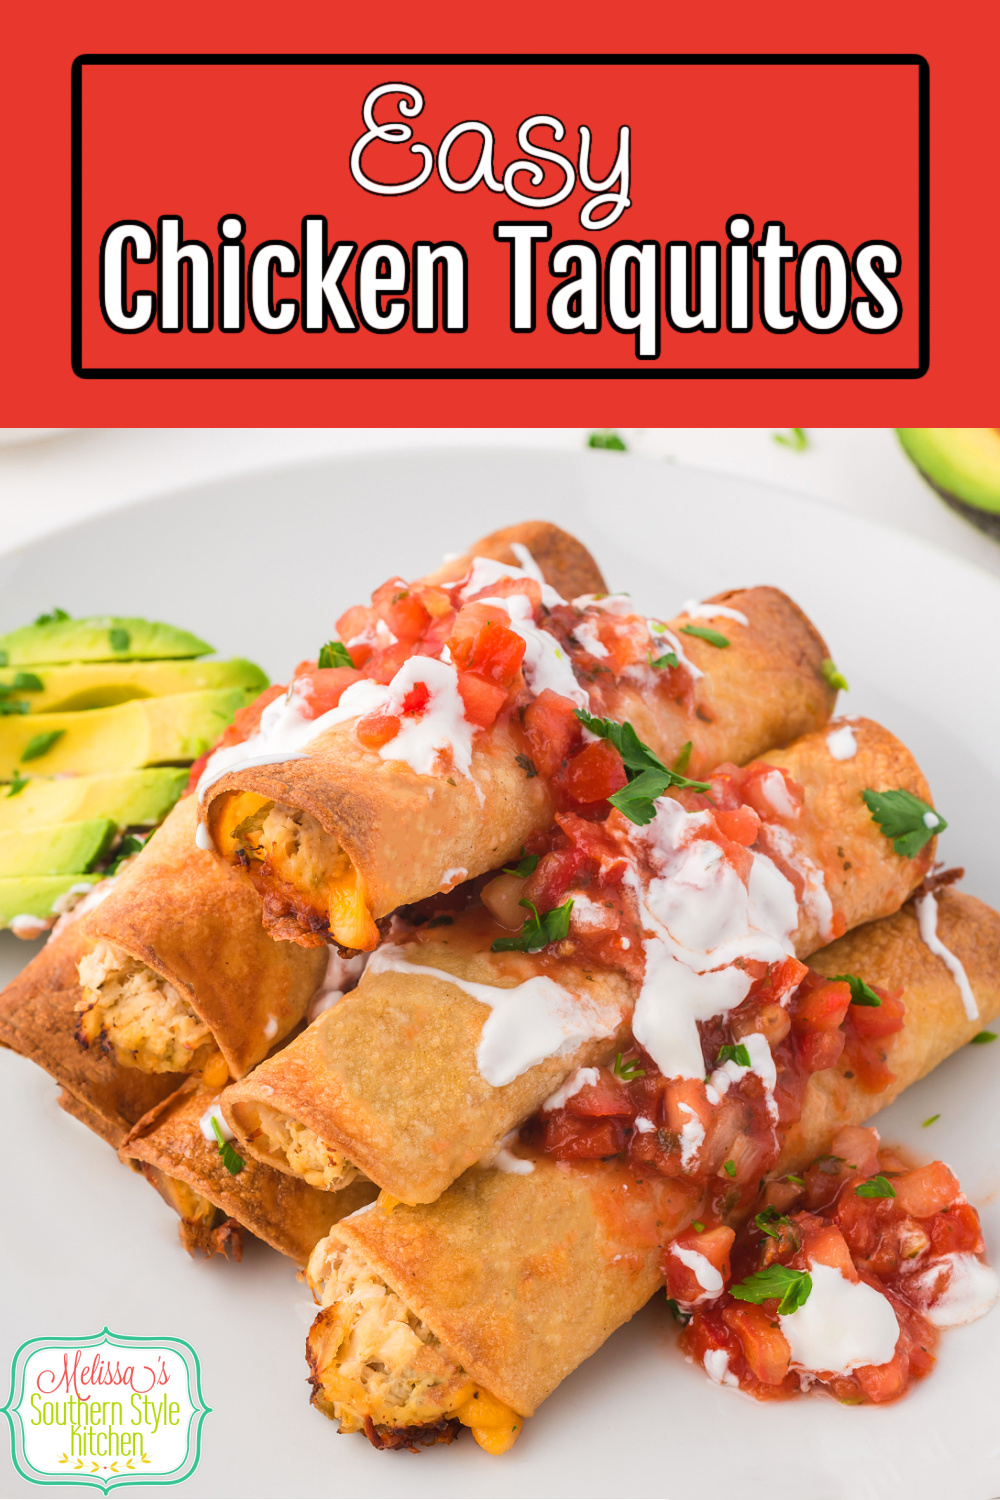 This Taquitos Recipe can be made using chicken or shredded beef for a crispy flavorful and insanely delicious Mexican meal.  #chickentaquitos #beeftaquitos #mexicanfood #chicken #easychickenrecipes #taquitos via @melissasssk